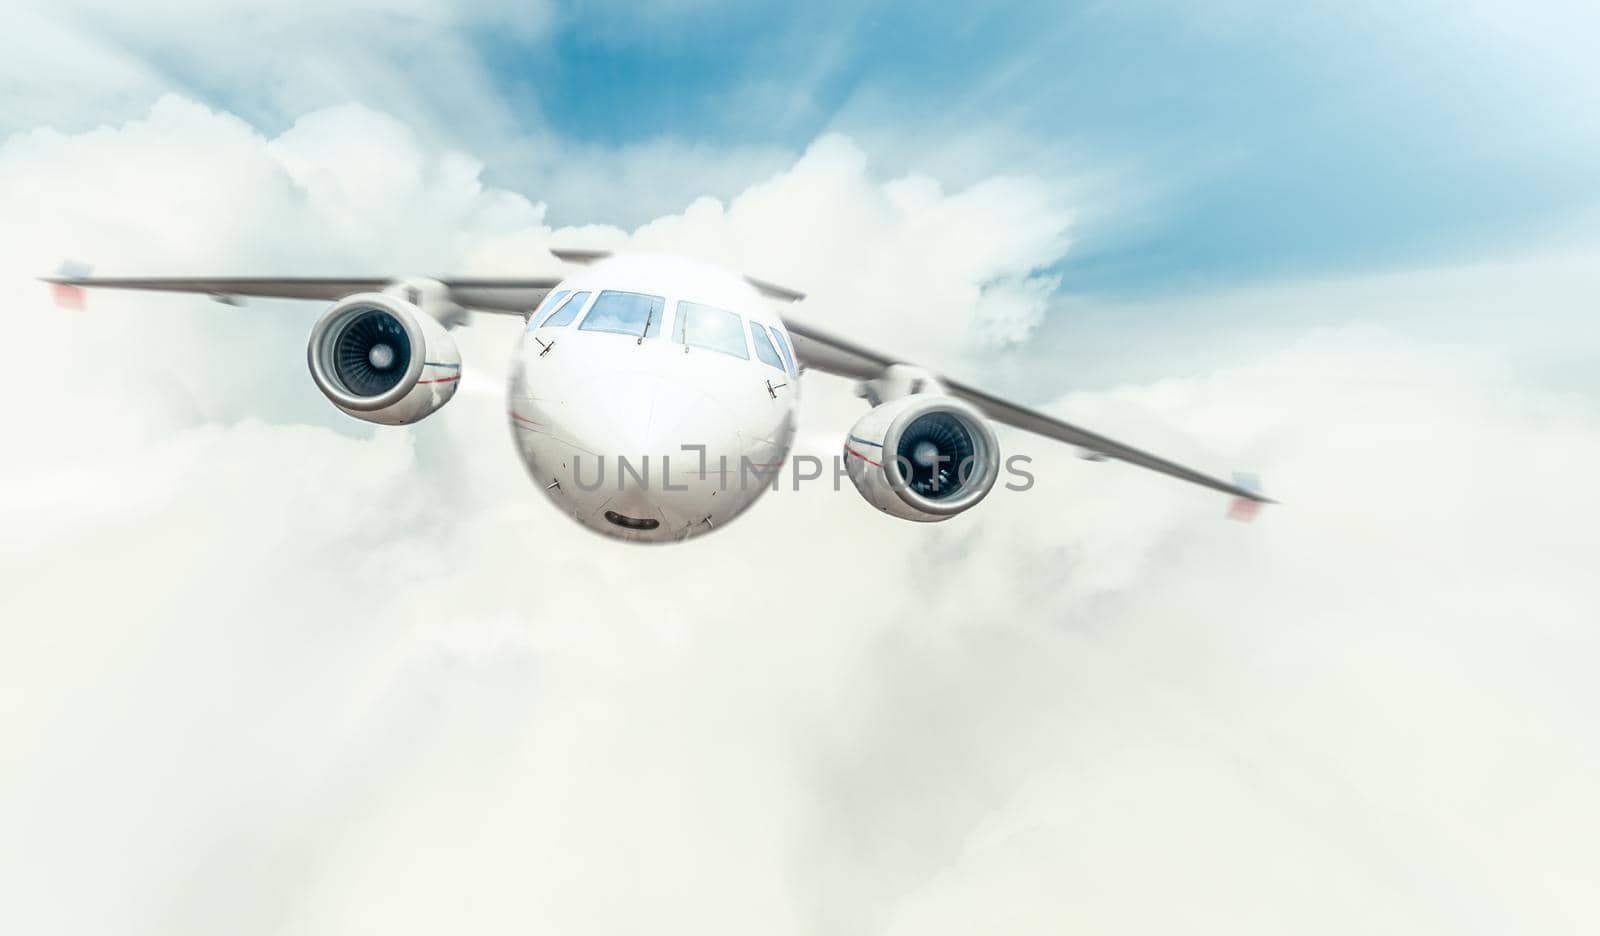 Passenger plane with cockpit and engines in front view flying high in blue cloudy sky. Comfortable and fast travelling by air. Business and touristic trips. Aviation and aircraft.